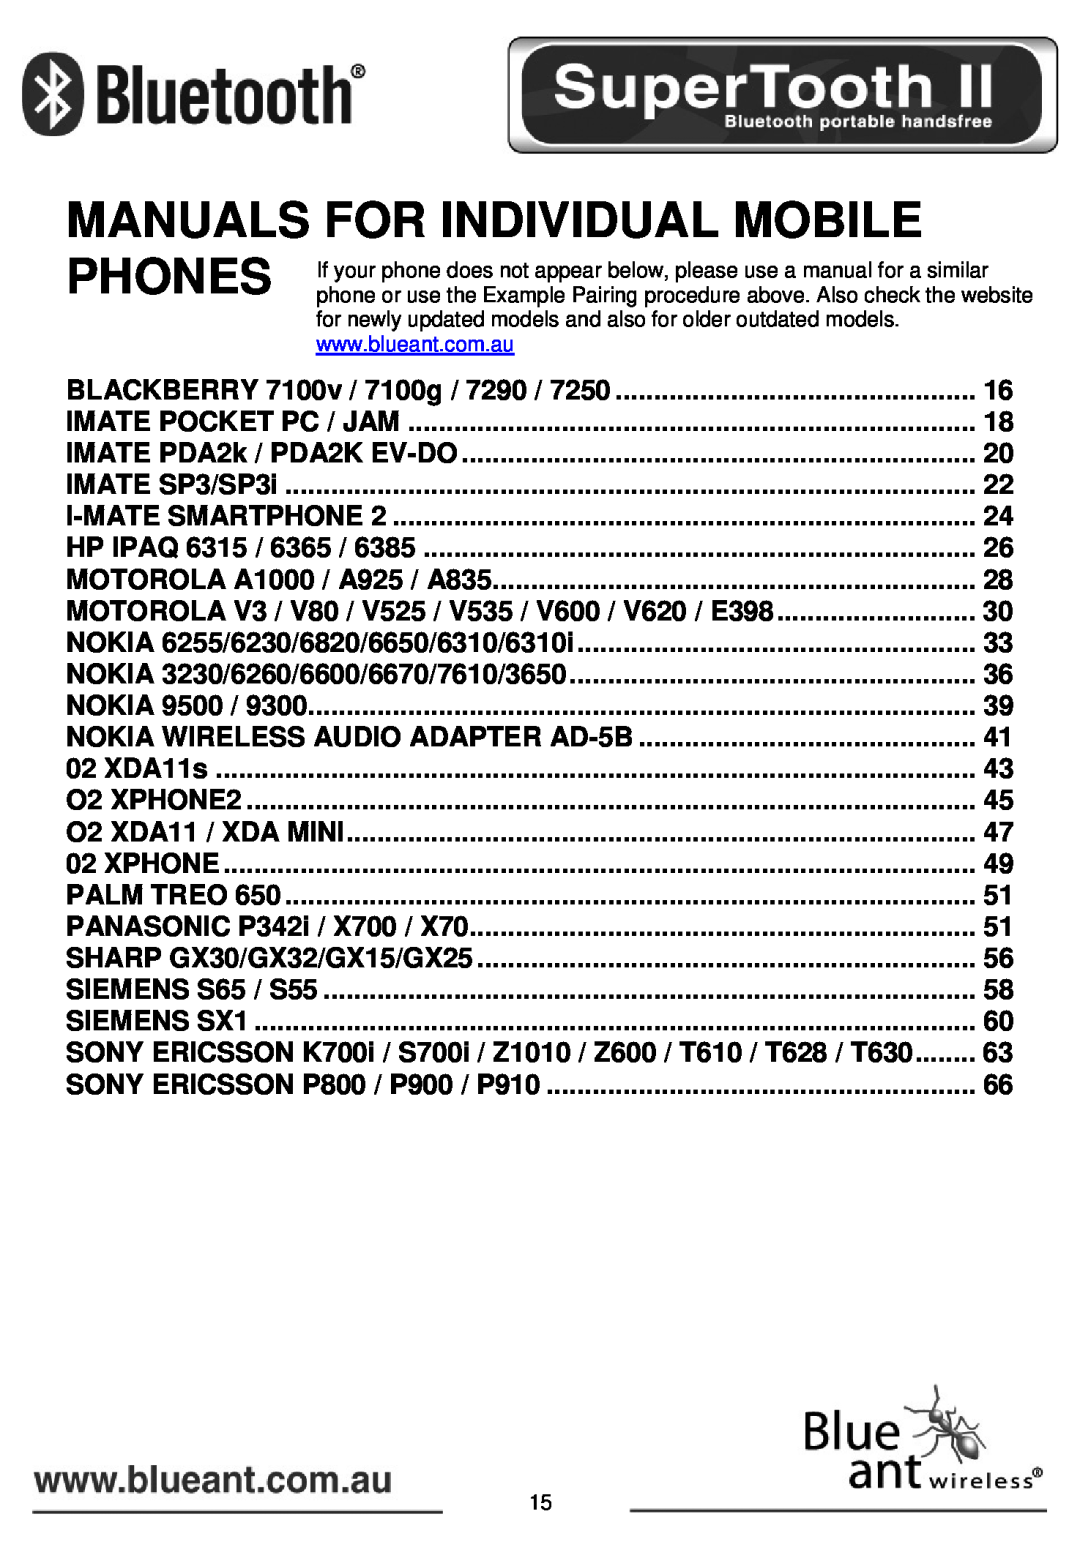 BlueAnt Wireless SUPERTOOTH II manual Manuals For Individual Mobile 